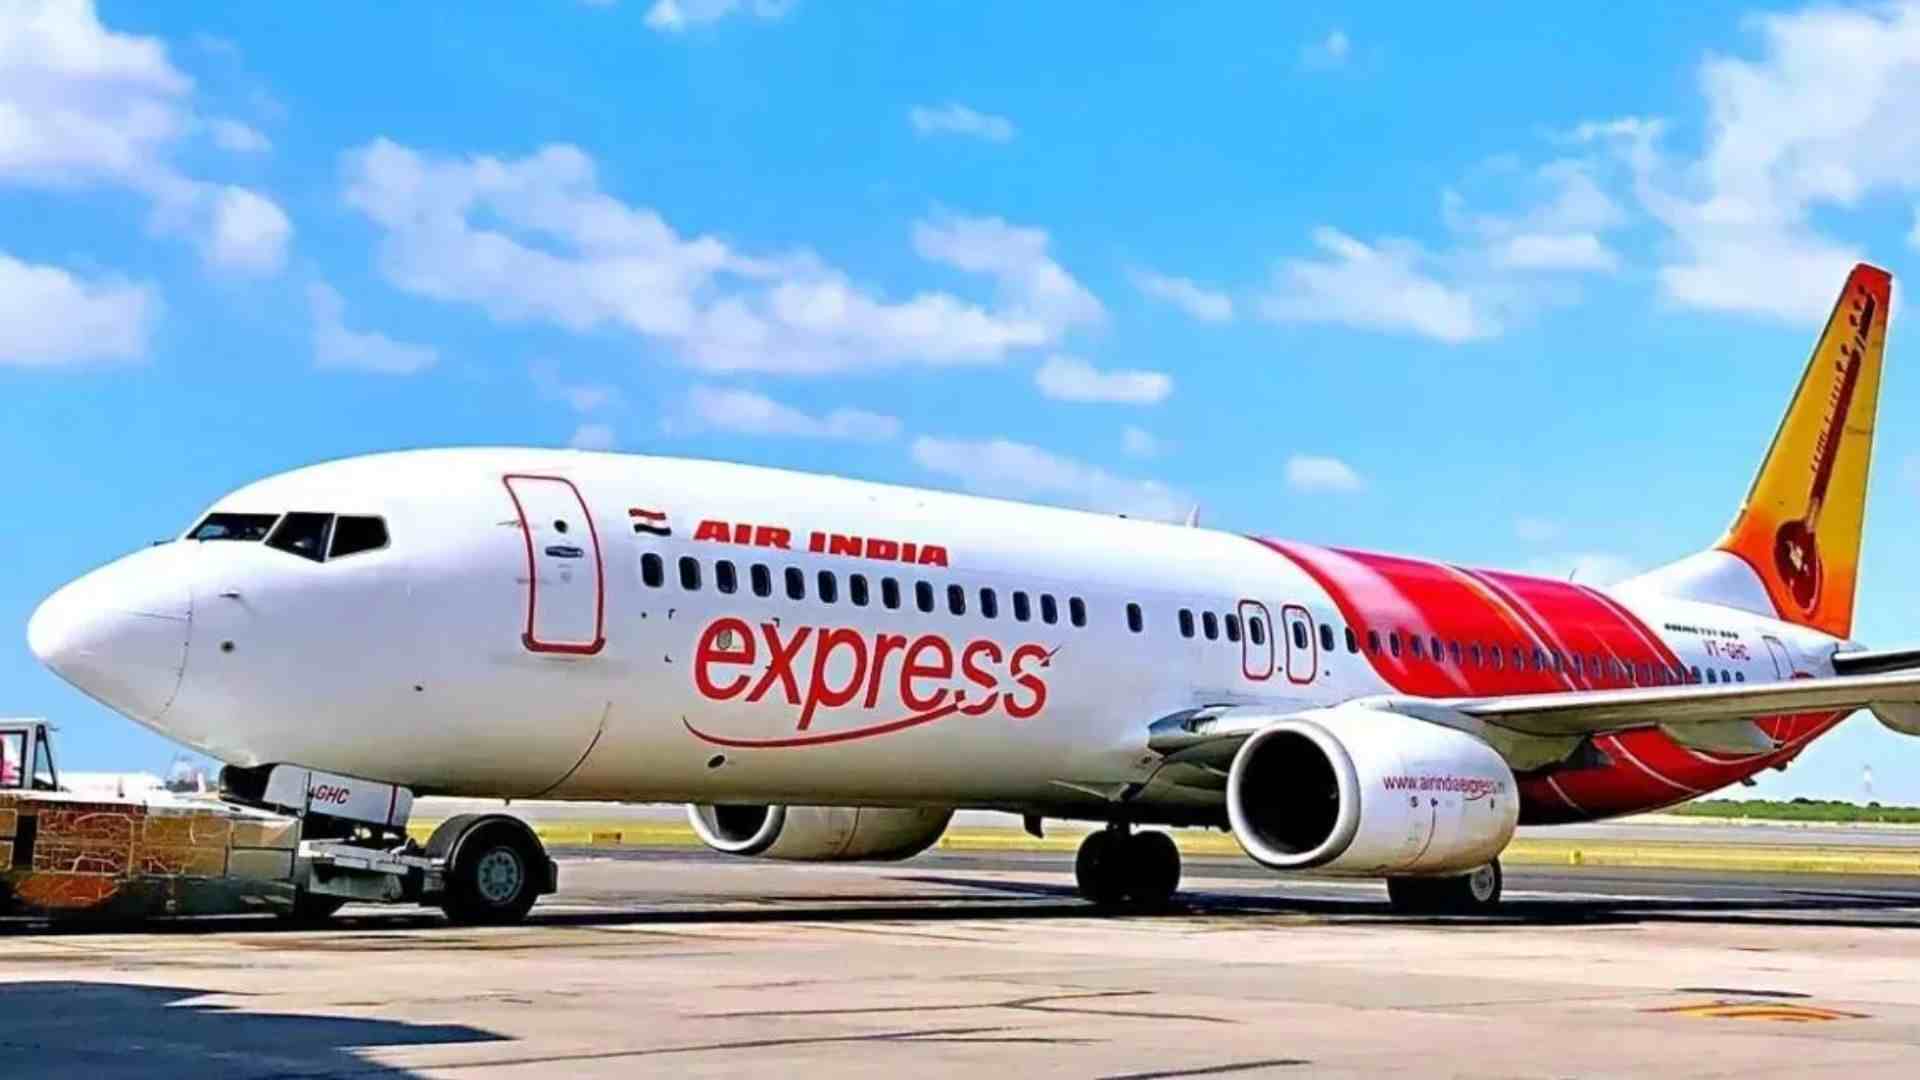 Air India Express Cancels 70 Flights Due To Crew Sick Leave